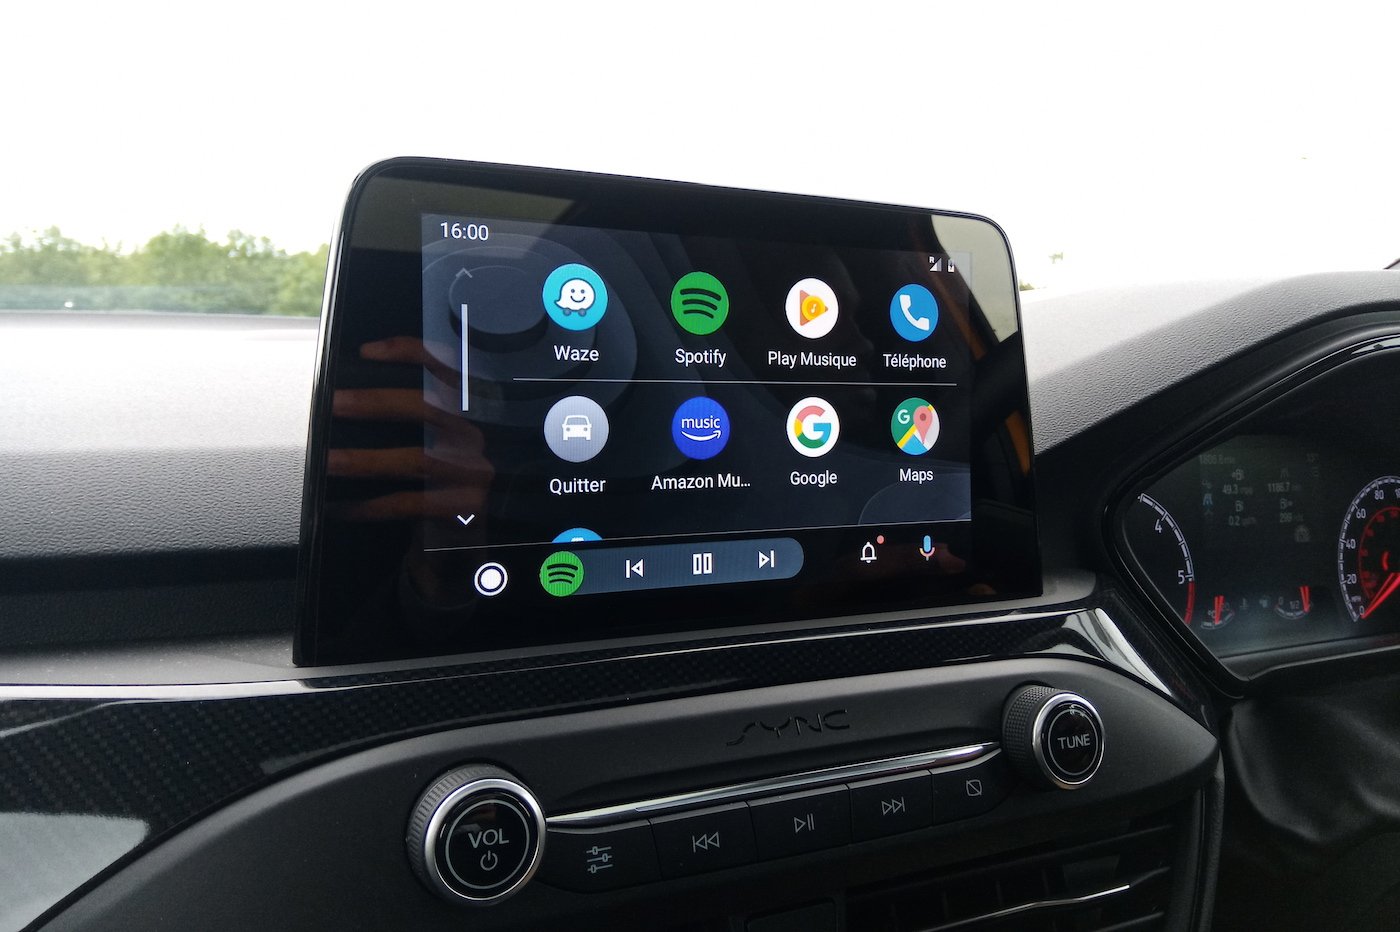 Google Maps continues to evolve on Android Auto: here are the new features